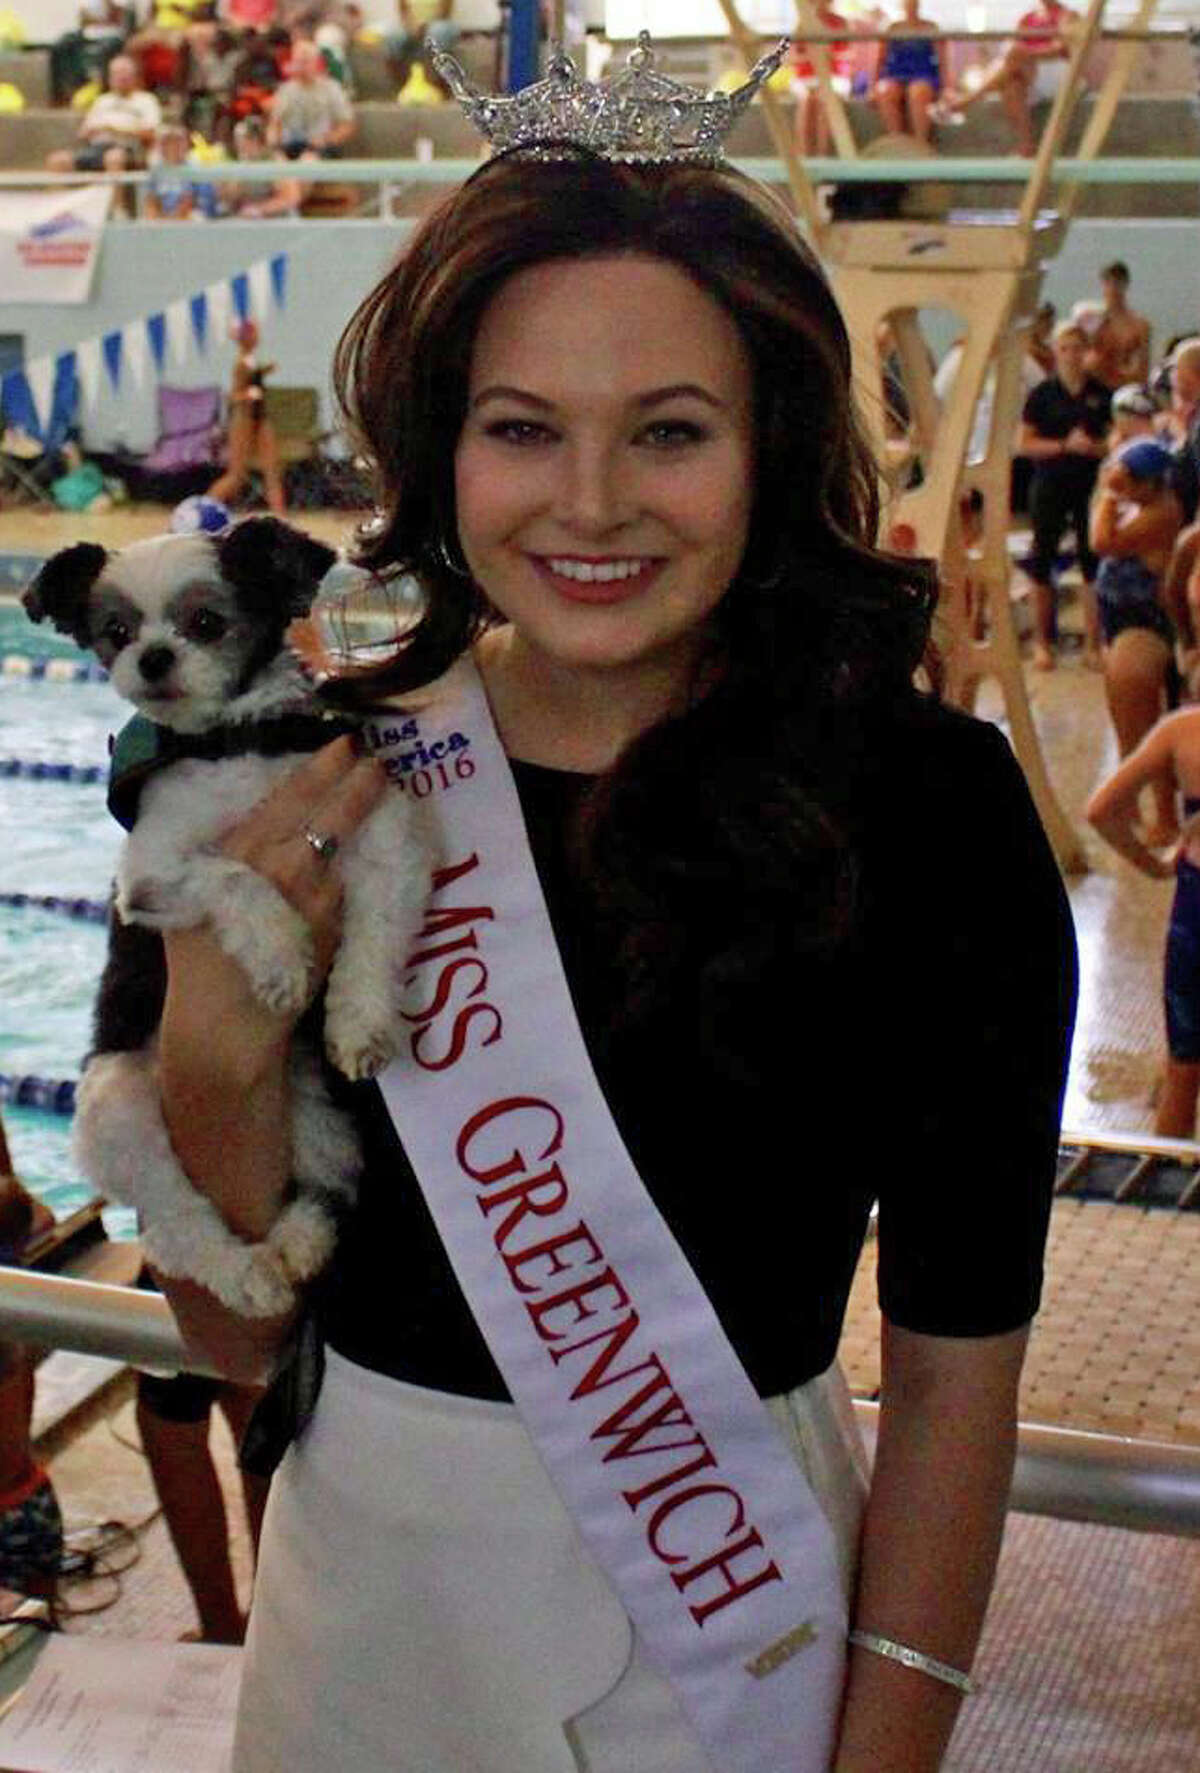 Pippa Leigh, Miss Greenwich 2016, performed the National Anthem for the Nutmeg State Games swimming events at Jack Suydam Natatorium in Kaiser Hall at Central Connecticut State University on Aug. 7. Leigh was the 2015 State Games of America Ladies Figure Skating Champion, putting Connecticut on the podium in Omaha last summer. The State Games of America are "America's Olympics." All sports and all states compete for gold every 2 years.